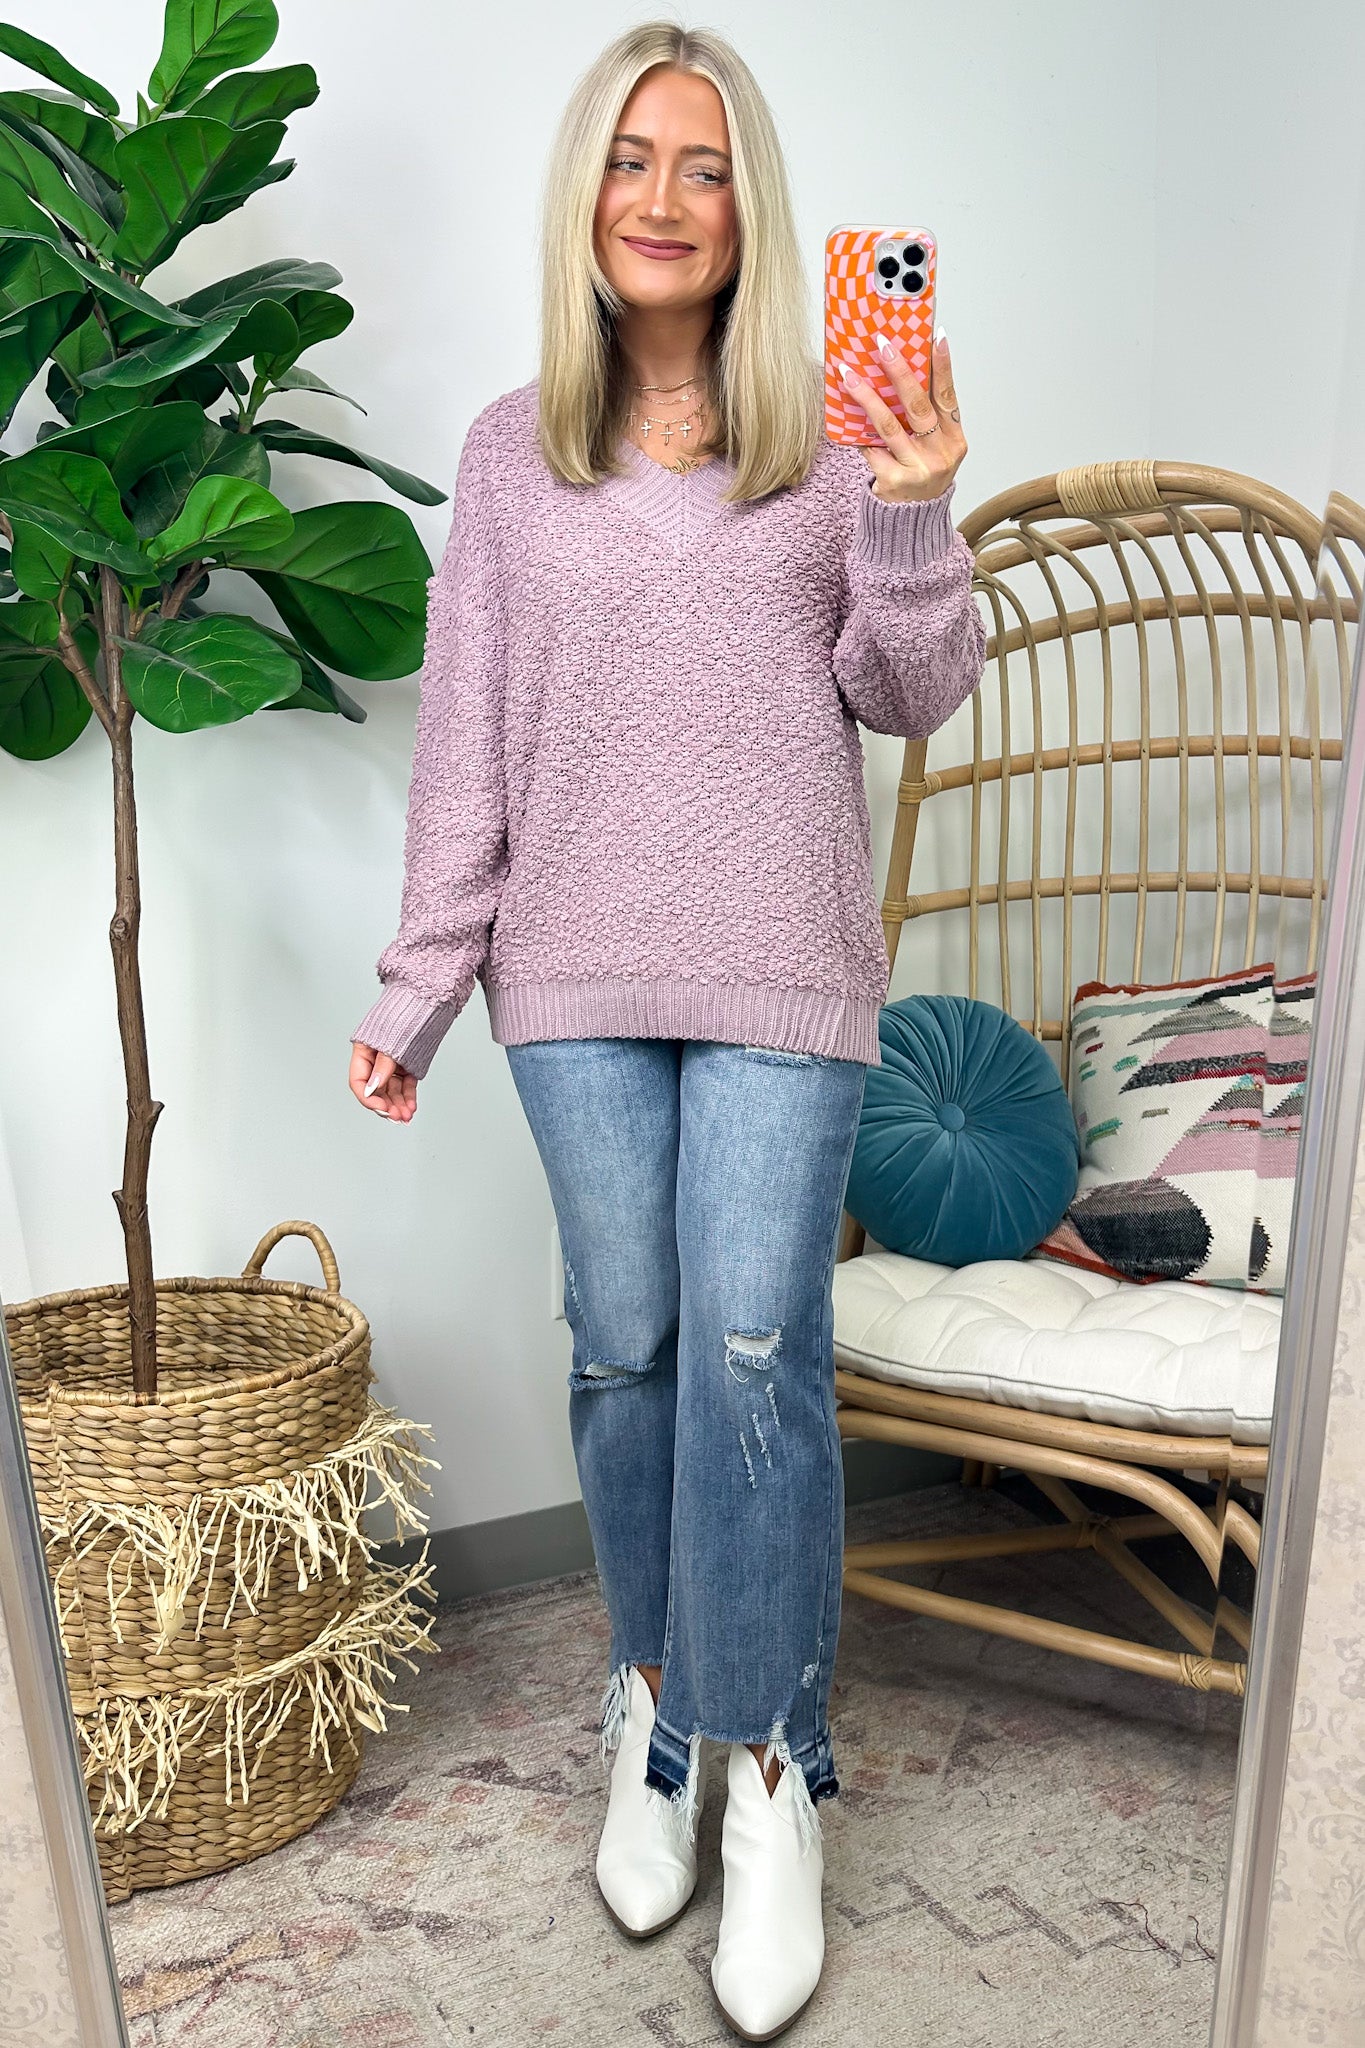  Warmest Aesthetic V-Neck Boucle Knit Sweater - FINAL SALE - Madison and Mallory